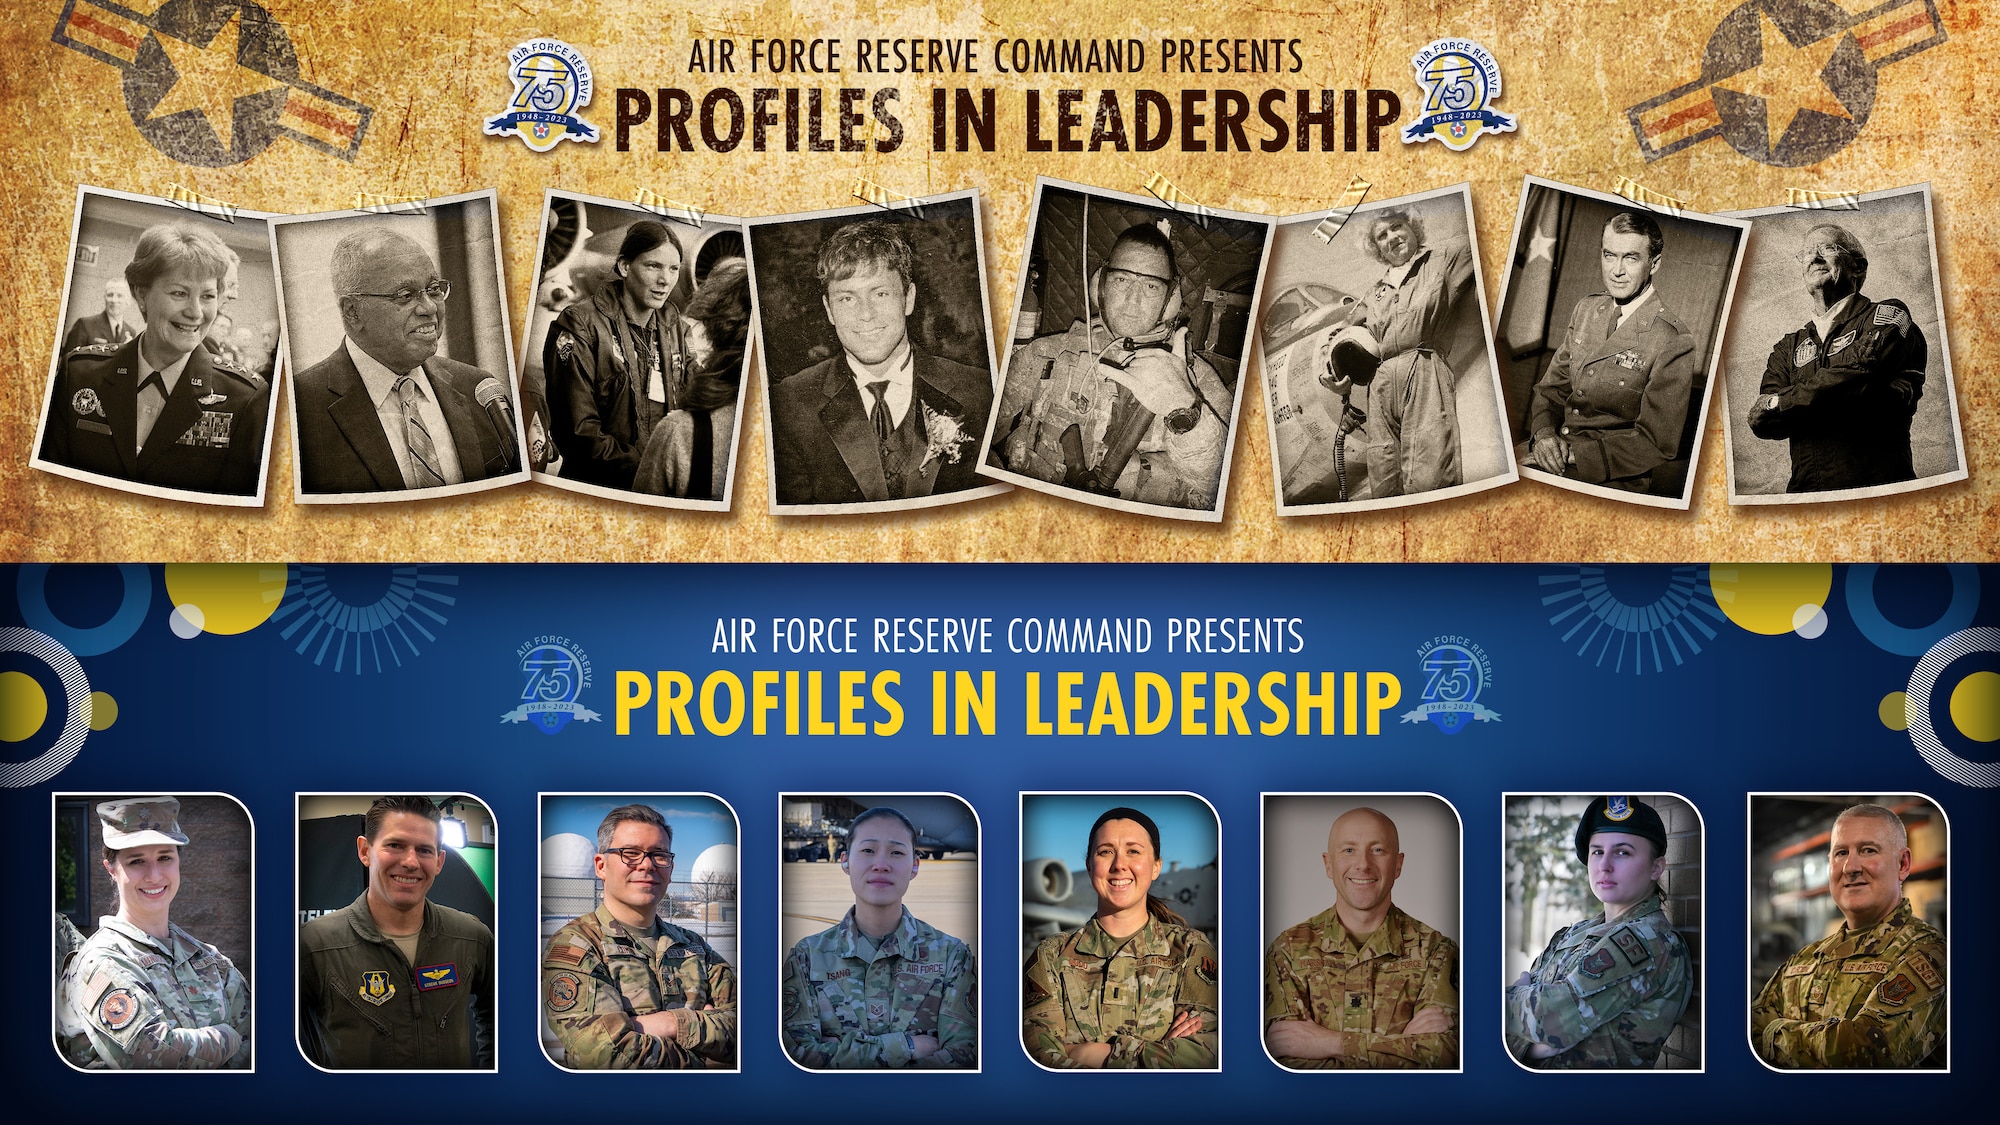 Air Force Reserve Command Profiles in Leadership Volume 8 main image. Click on individual images for names and full poster.